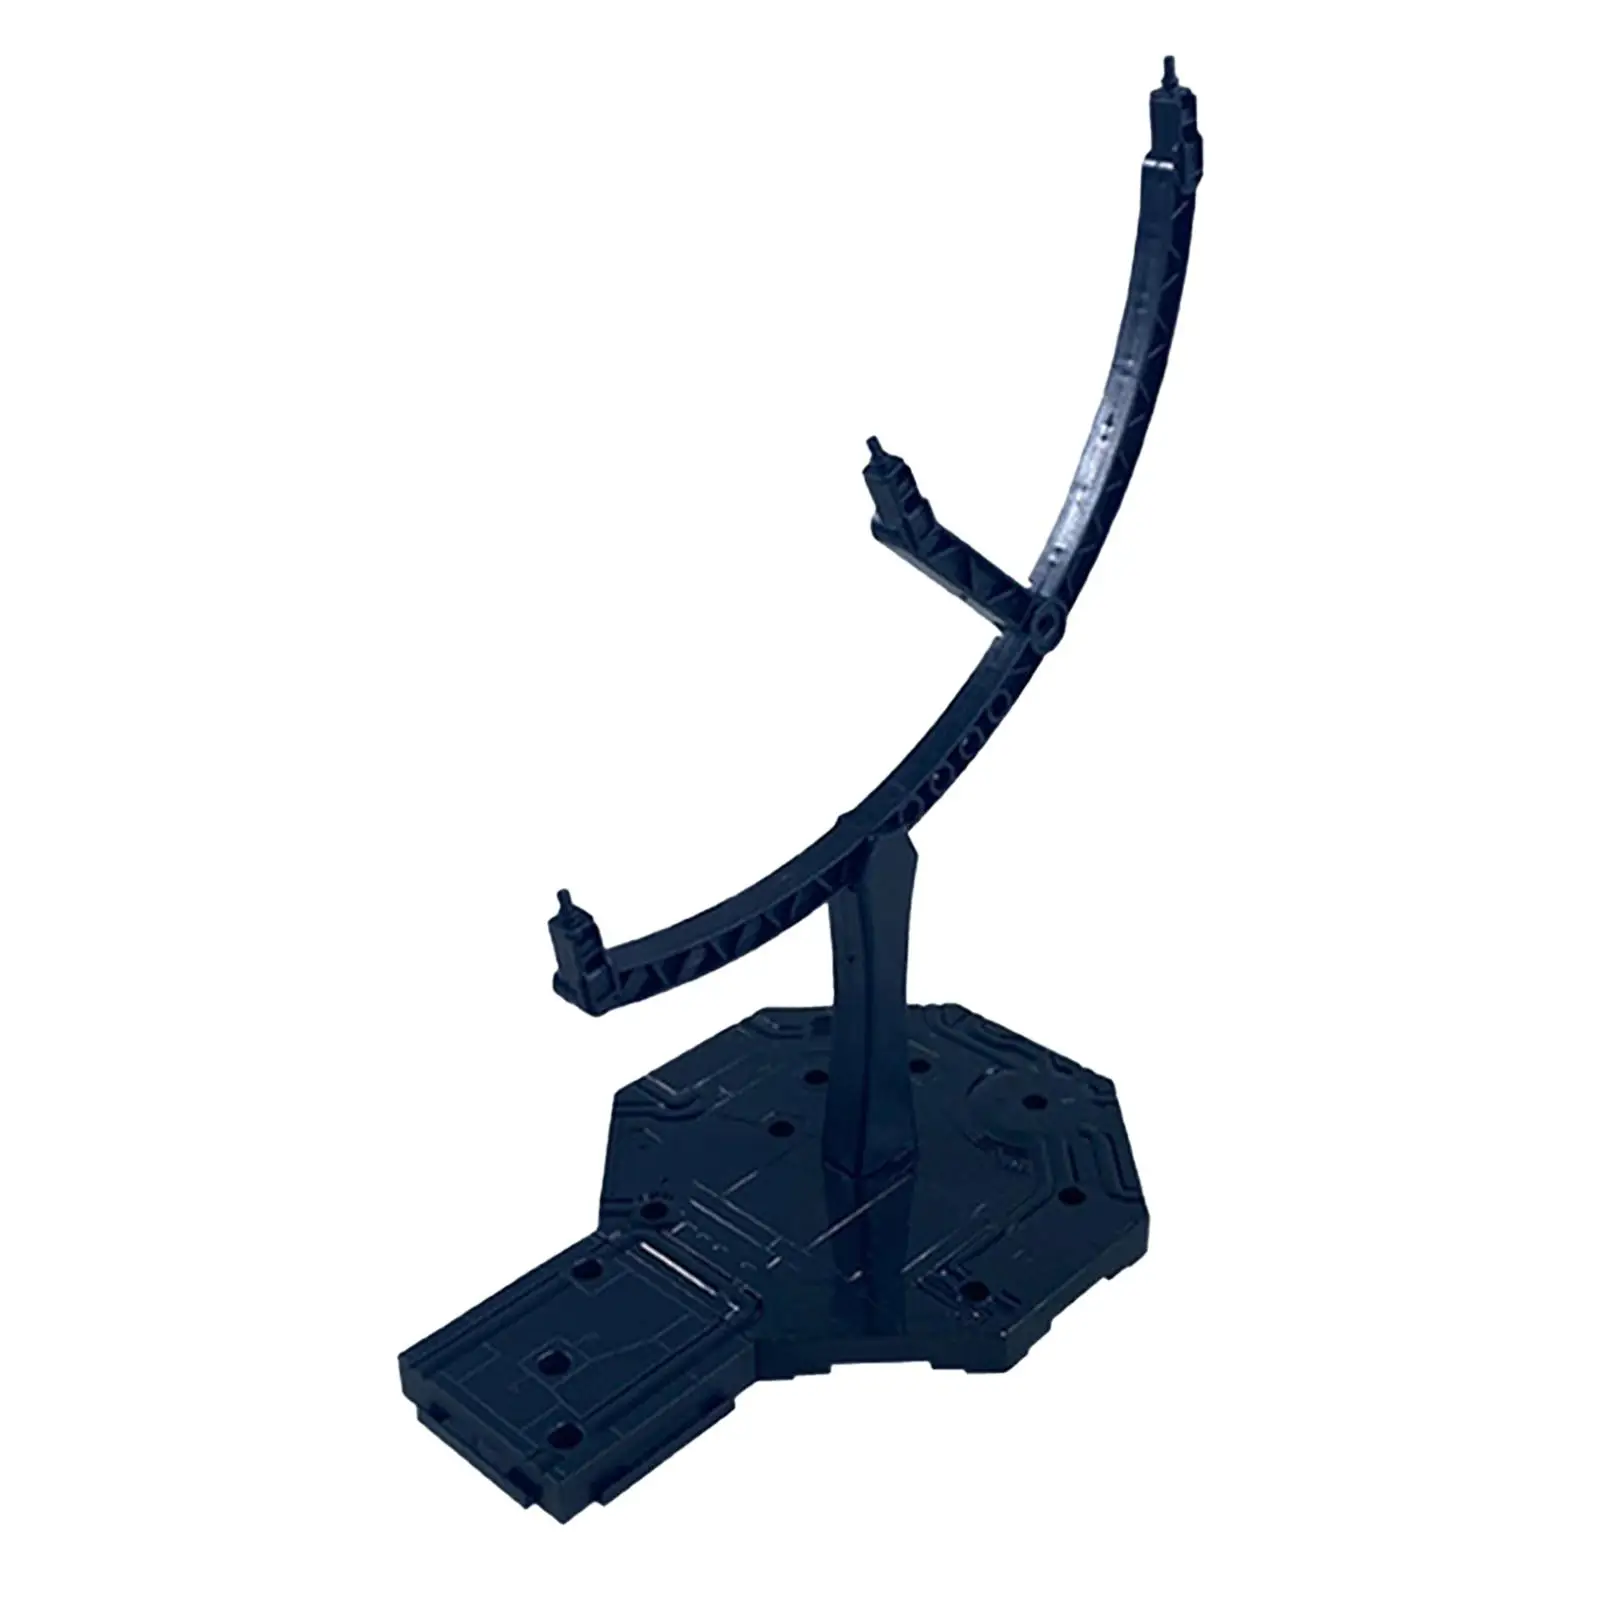 Action Figure Display Base Rack Durable Lightweight Showcasing Sturdy Support